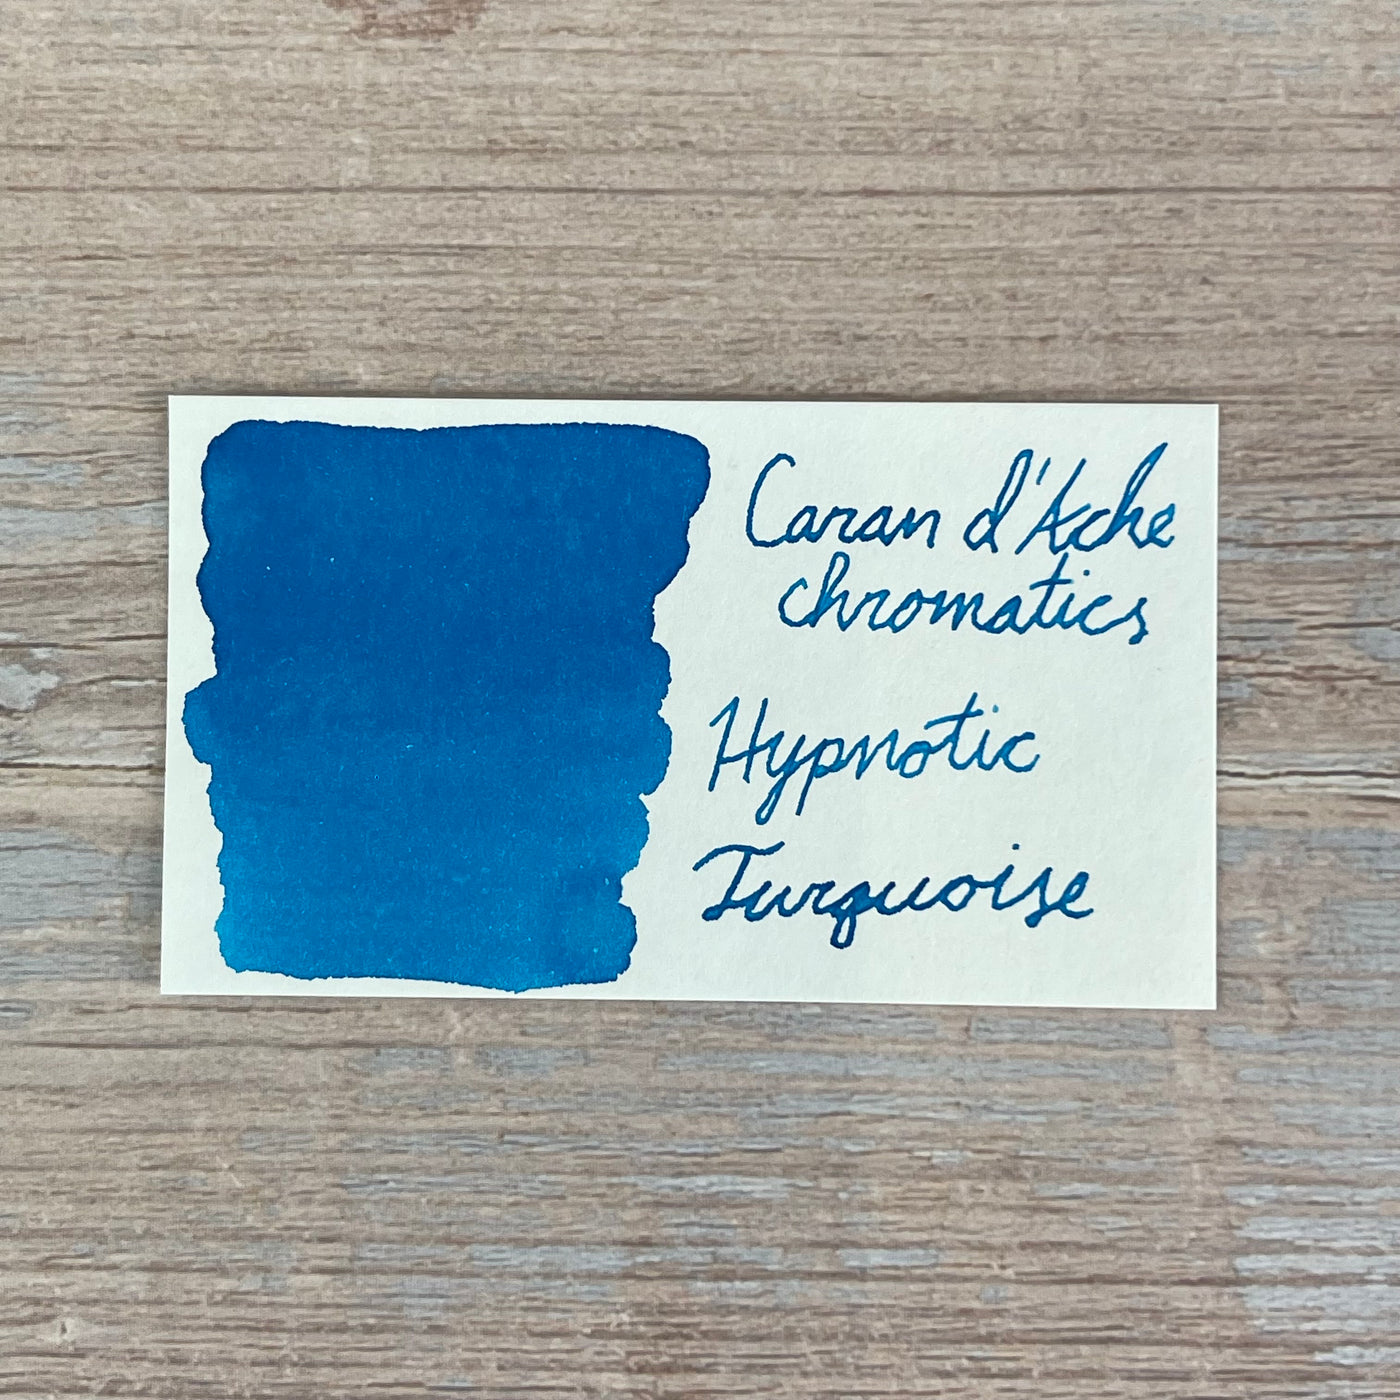 Caran d'Ache Chromatic Hypnotic Turquoise - 50ml Bottled Ink